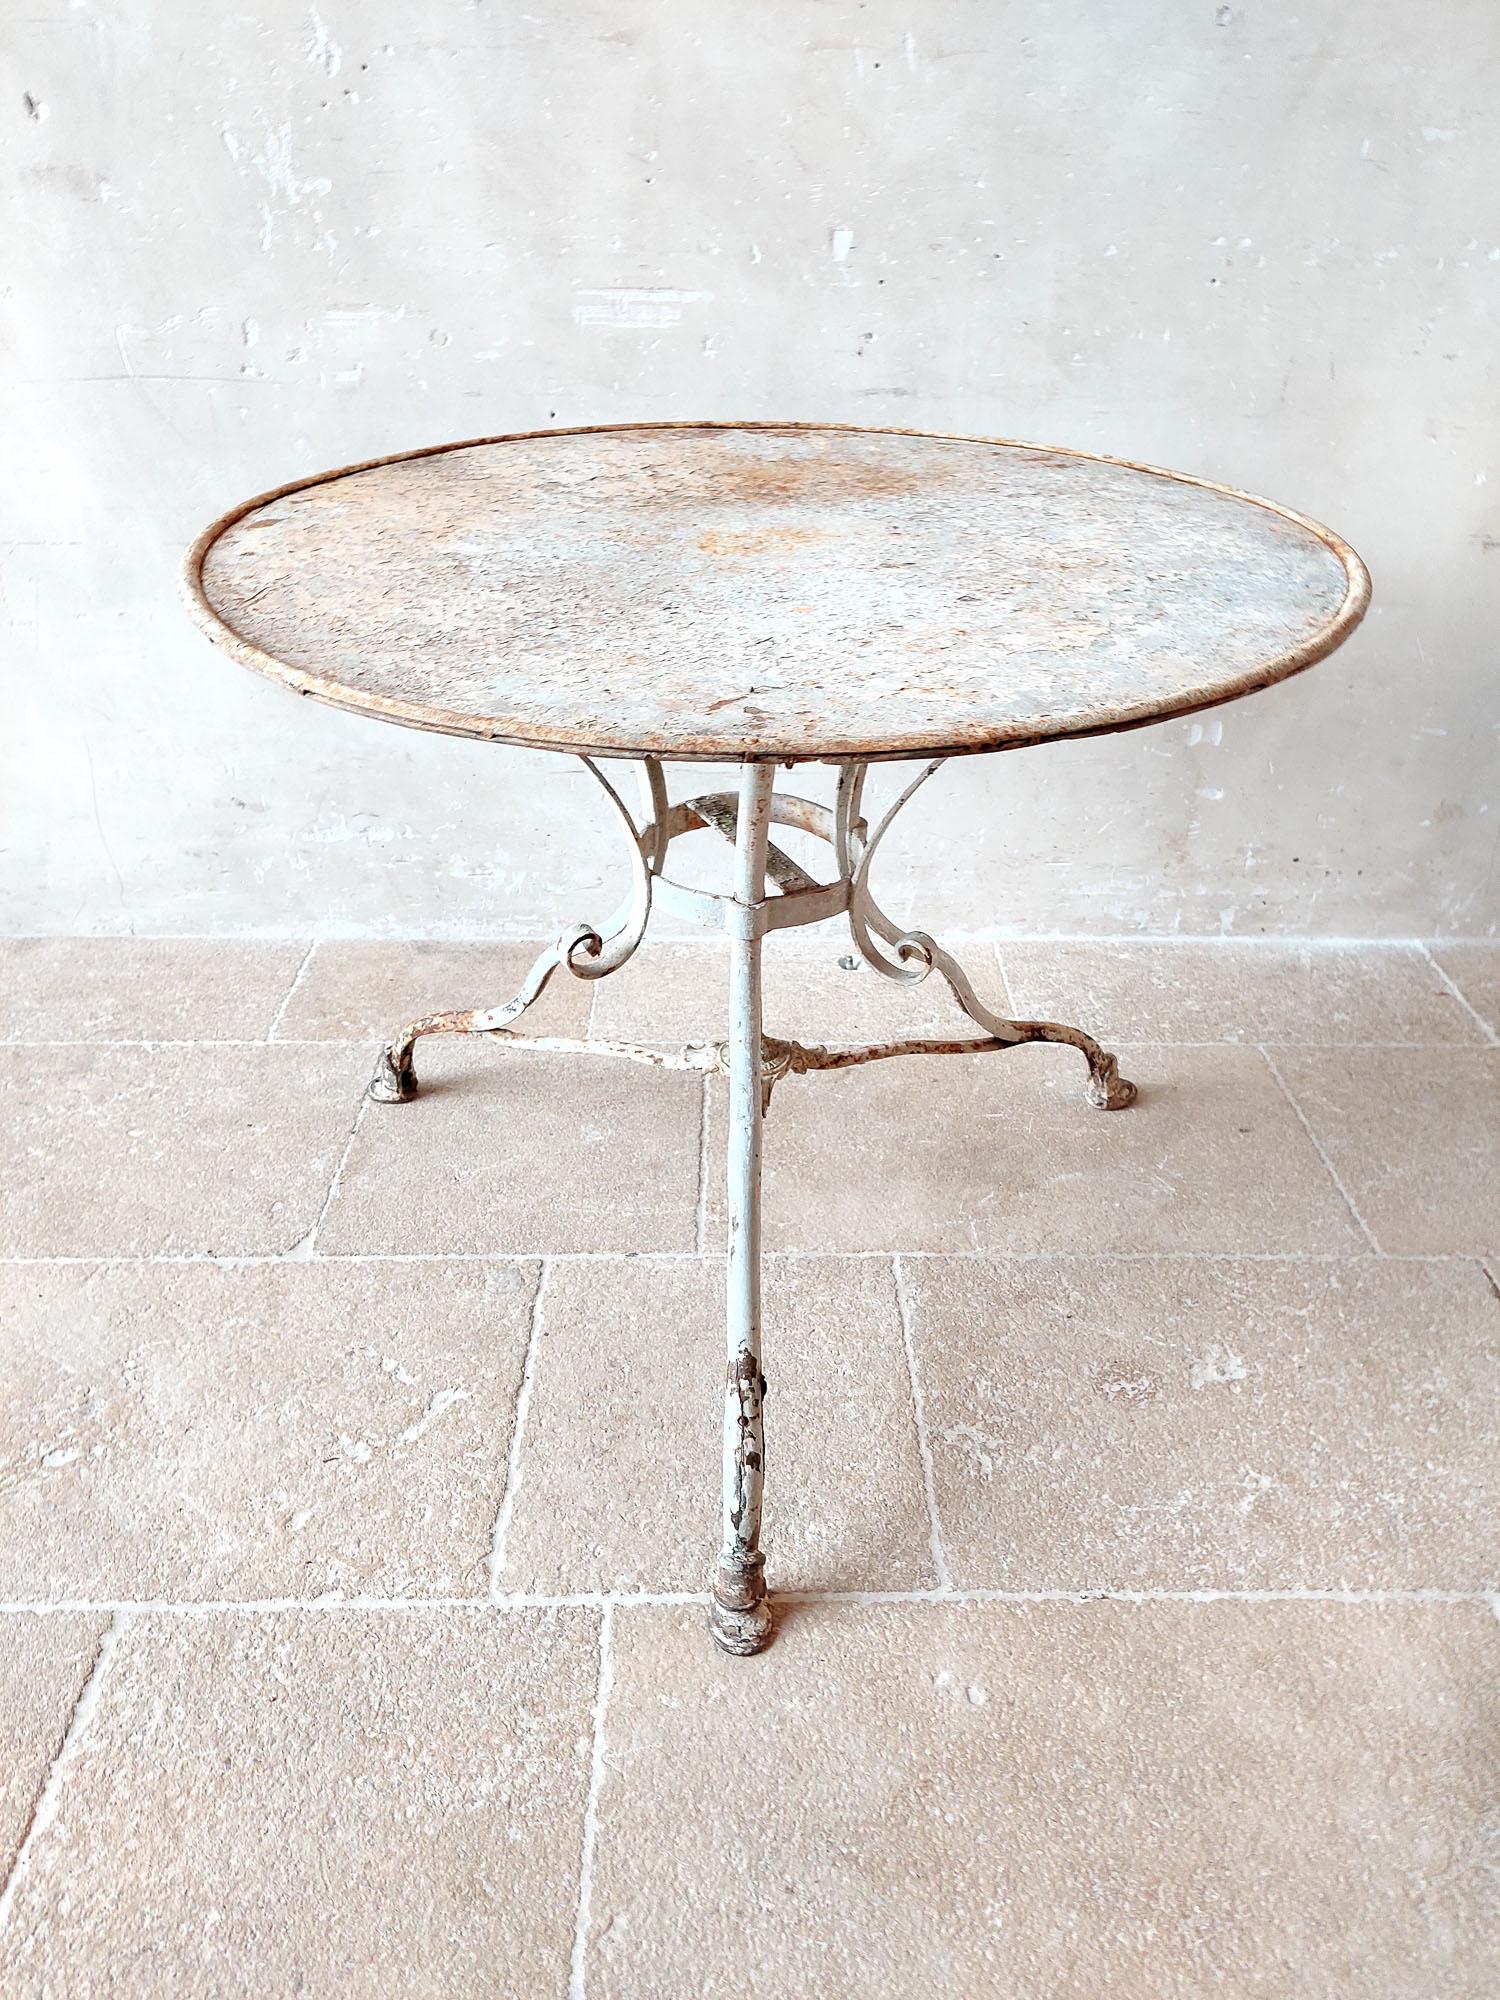 Antique Grassin à Arras garden table made of wrought iron with cast iron feet, with original weathered white-gray patina.

h 73 x diameter 91.5 cm